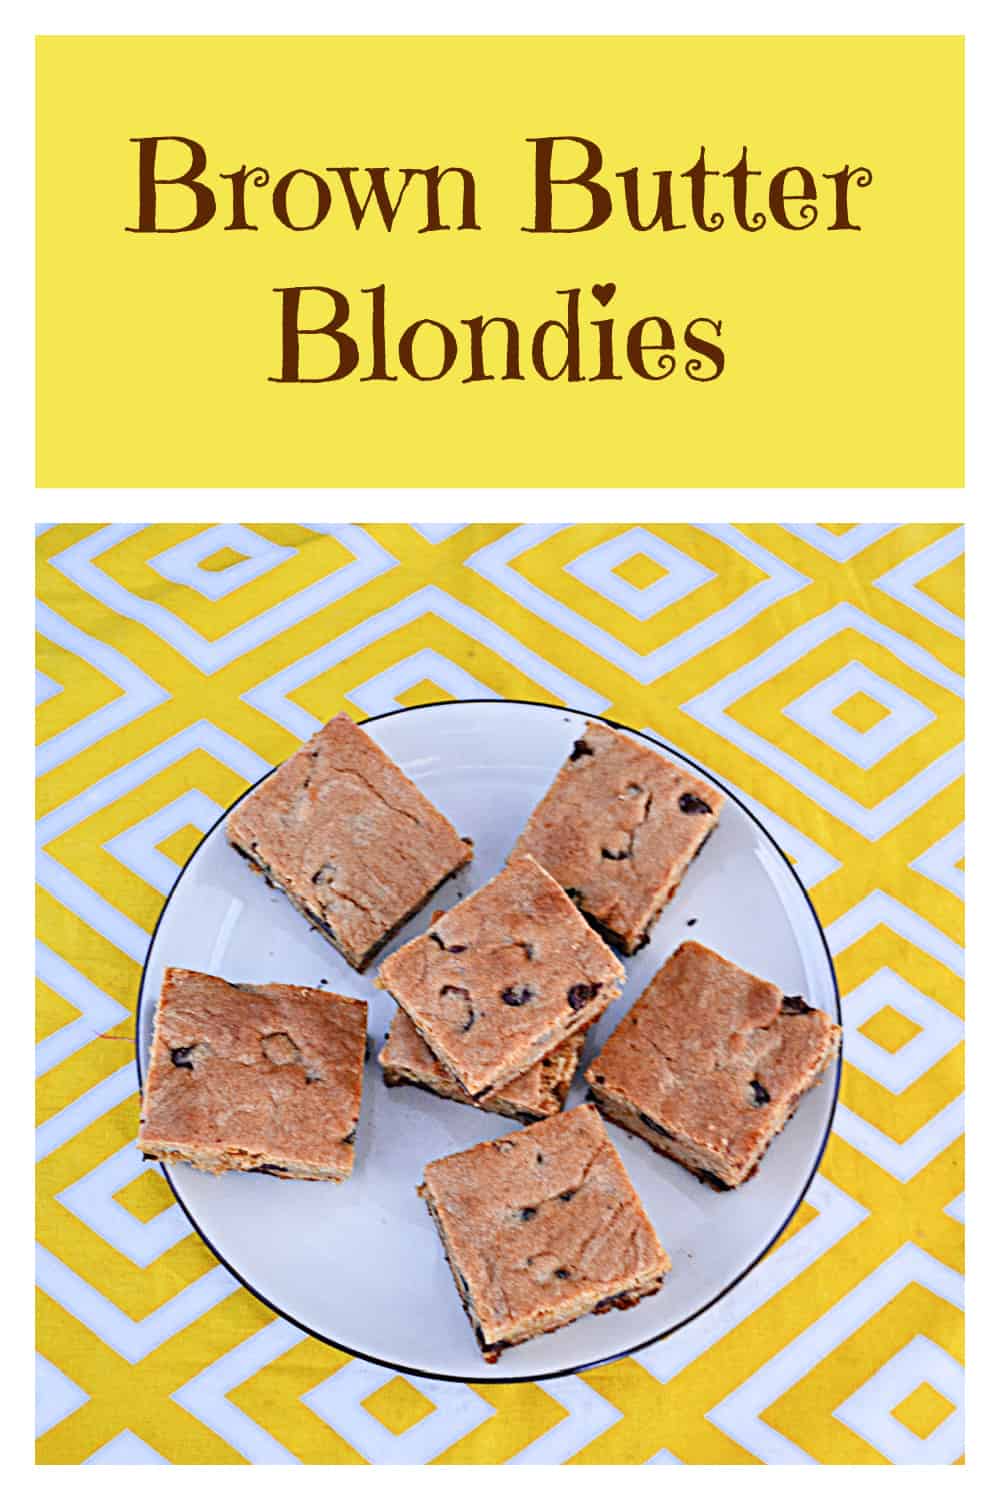 Pin Image:  Text title, a plate of blondies.